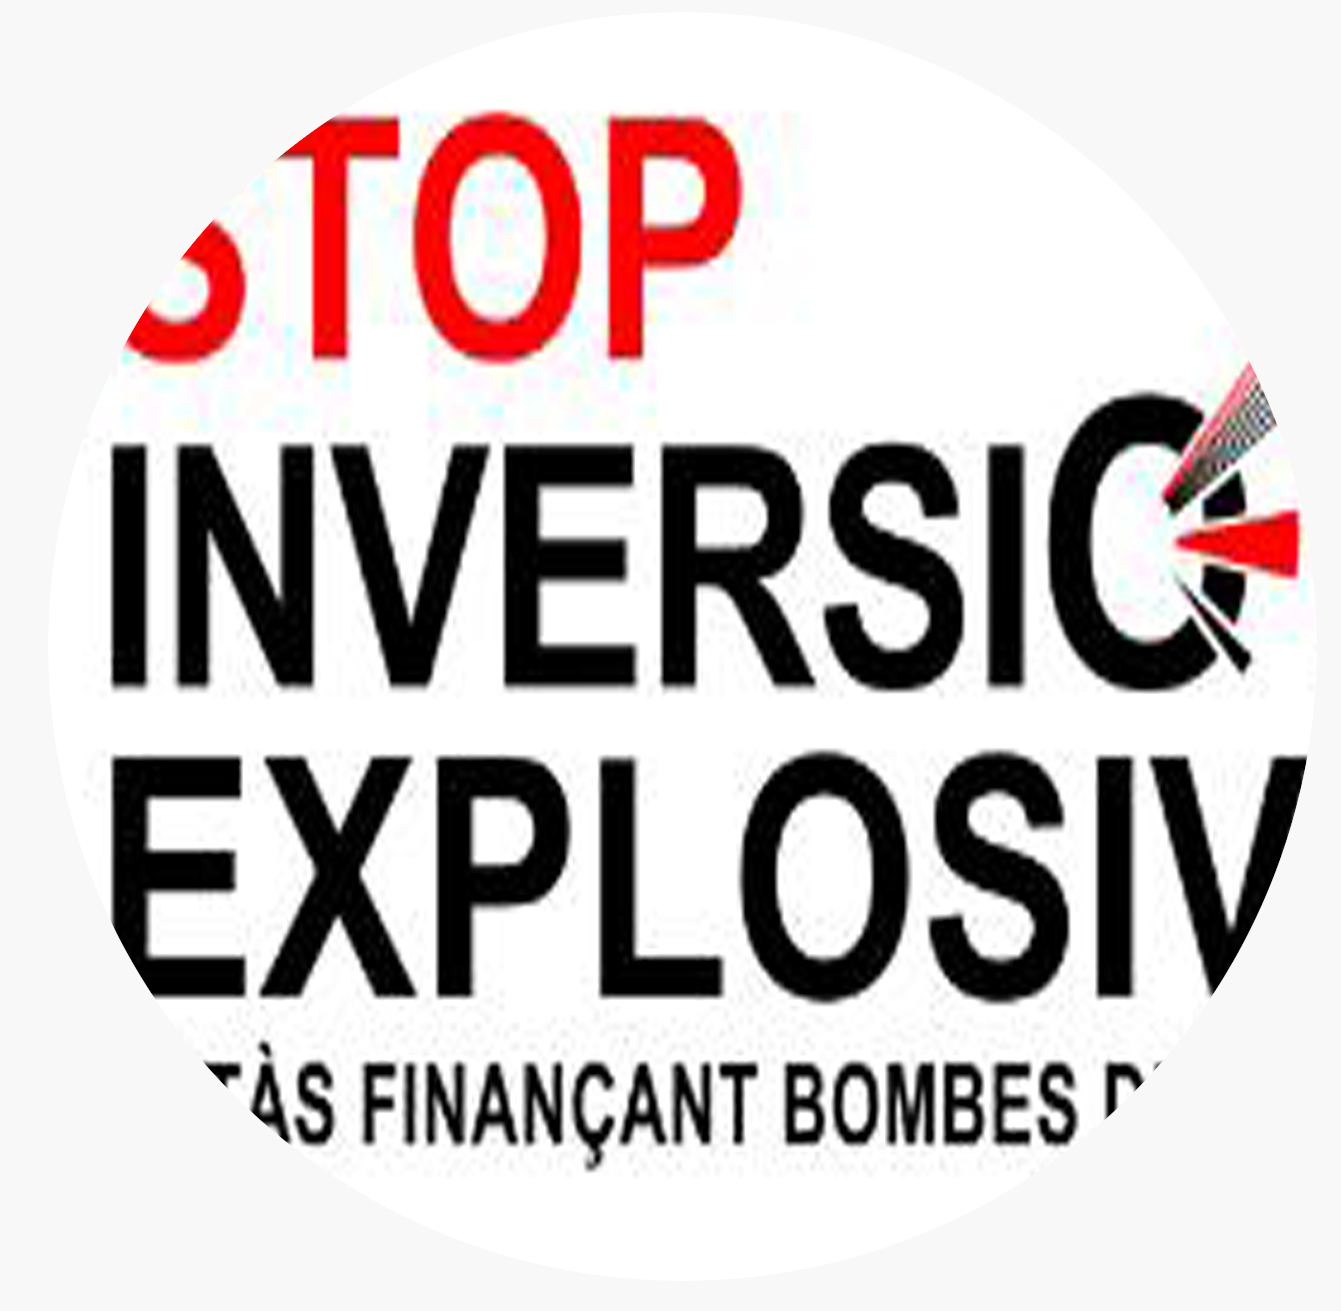 Stop inversions explosives-round